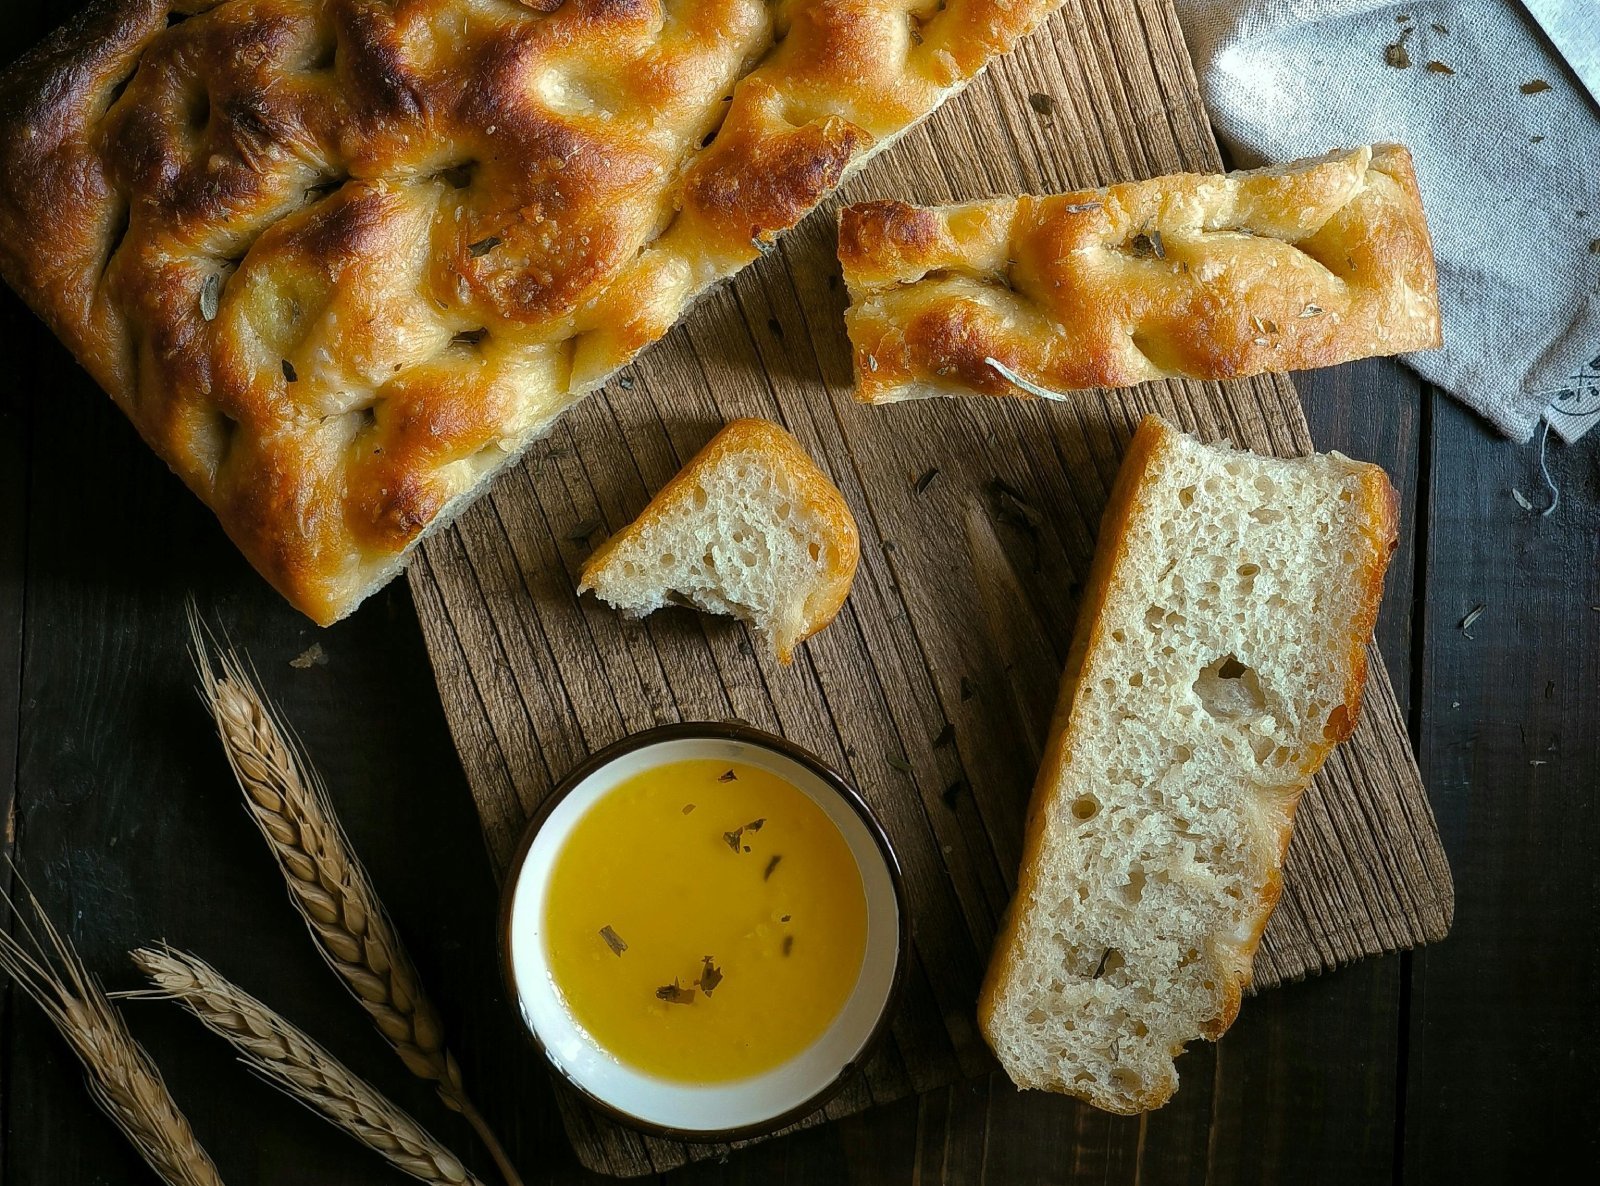 Image Credit: Pexels / Nunun Dy <p><span>Around mid-morning, Italians often enjoy a light snack known as merenda. This may consist of a slice of freshly baked focaccia, a handful of nuts, or a piece of fruit, providing a quick energy boost to carry them through the rest of the day. Merenda is more than just a snack; it’s a moment to pause and recharge, whether enjoyed alone or shared with colleagues or friends.</span></p>